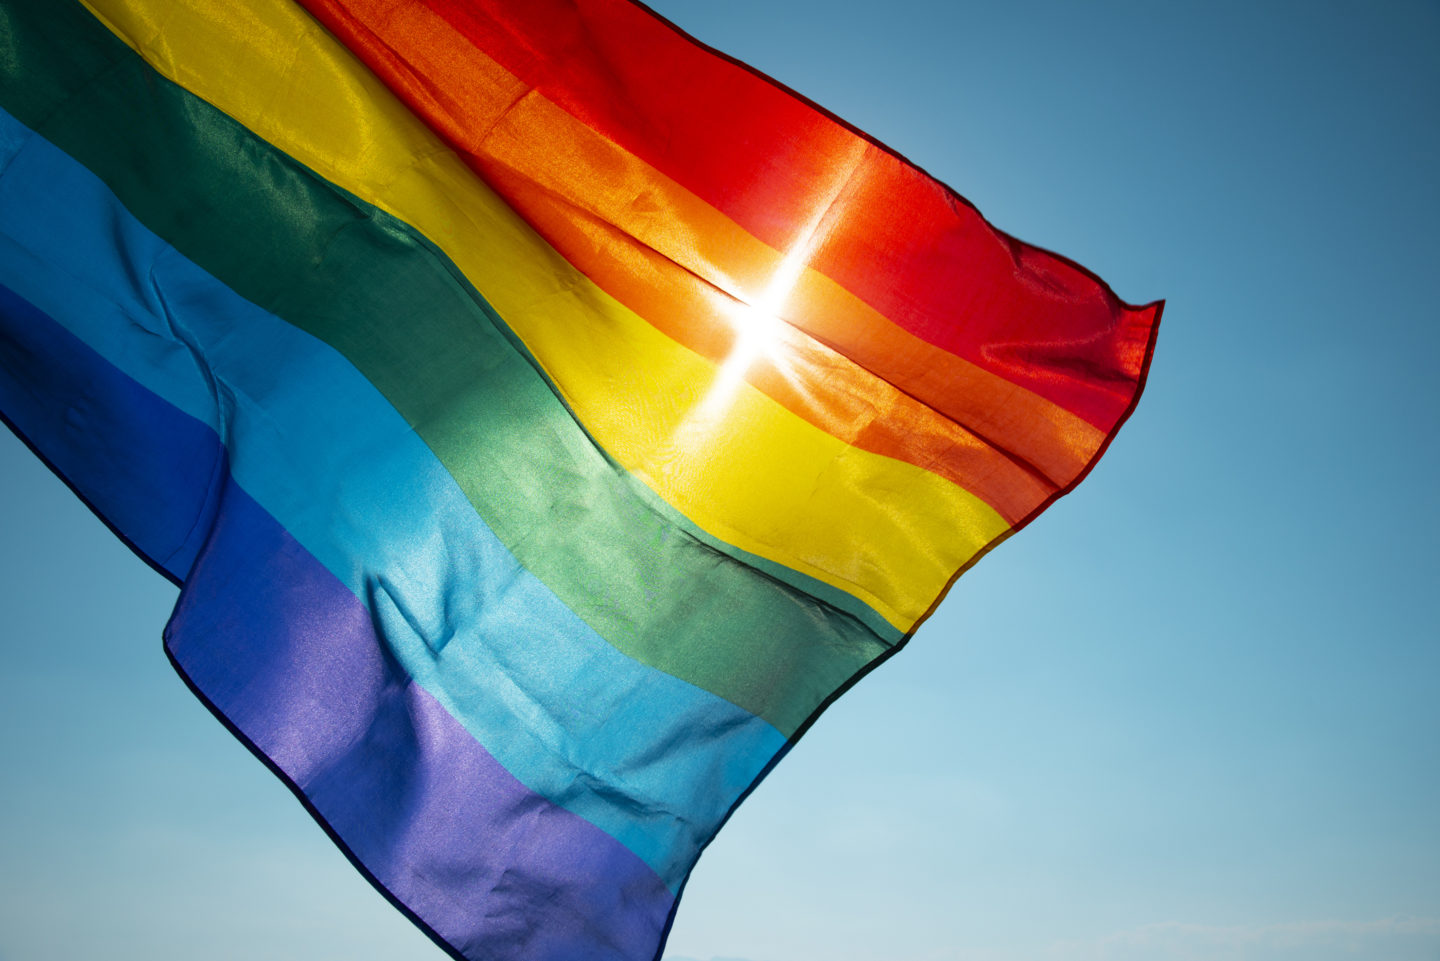 Catholic church told to shut down gay conversion therapy groups 5